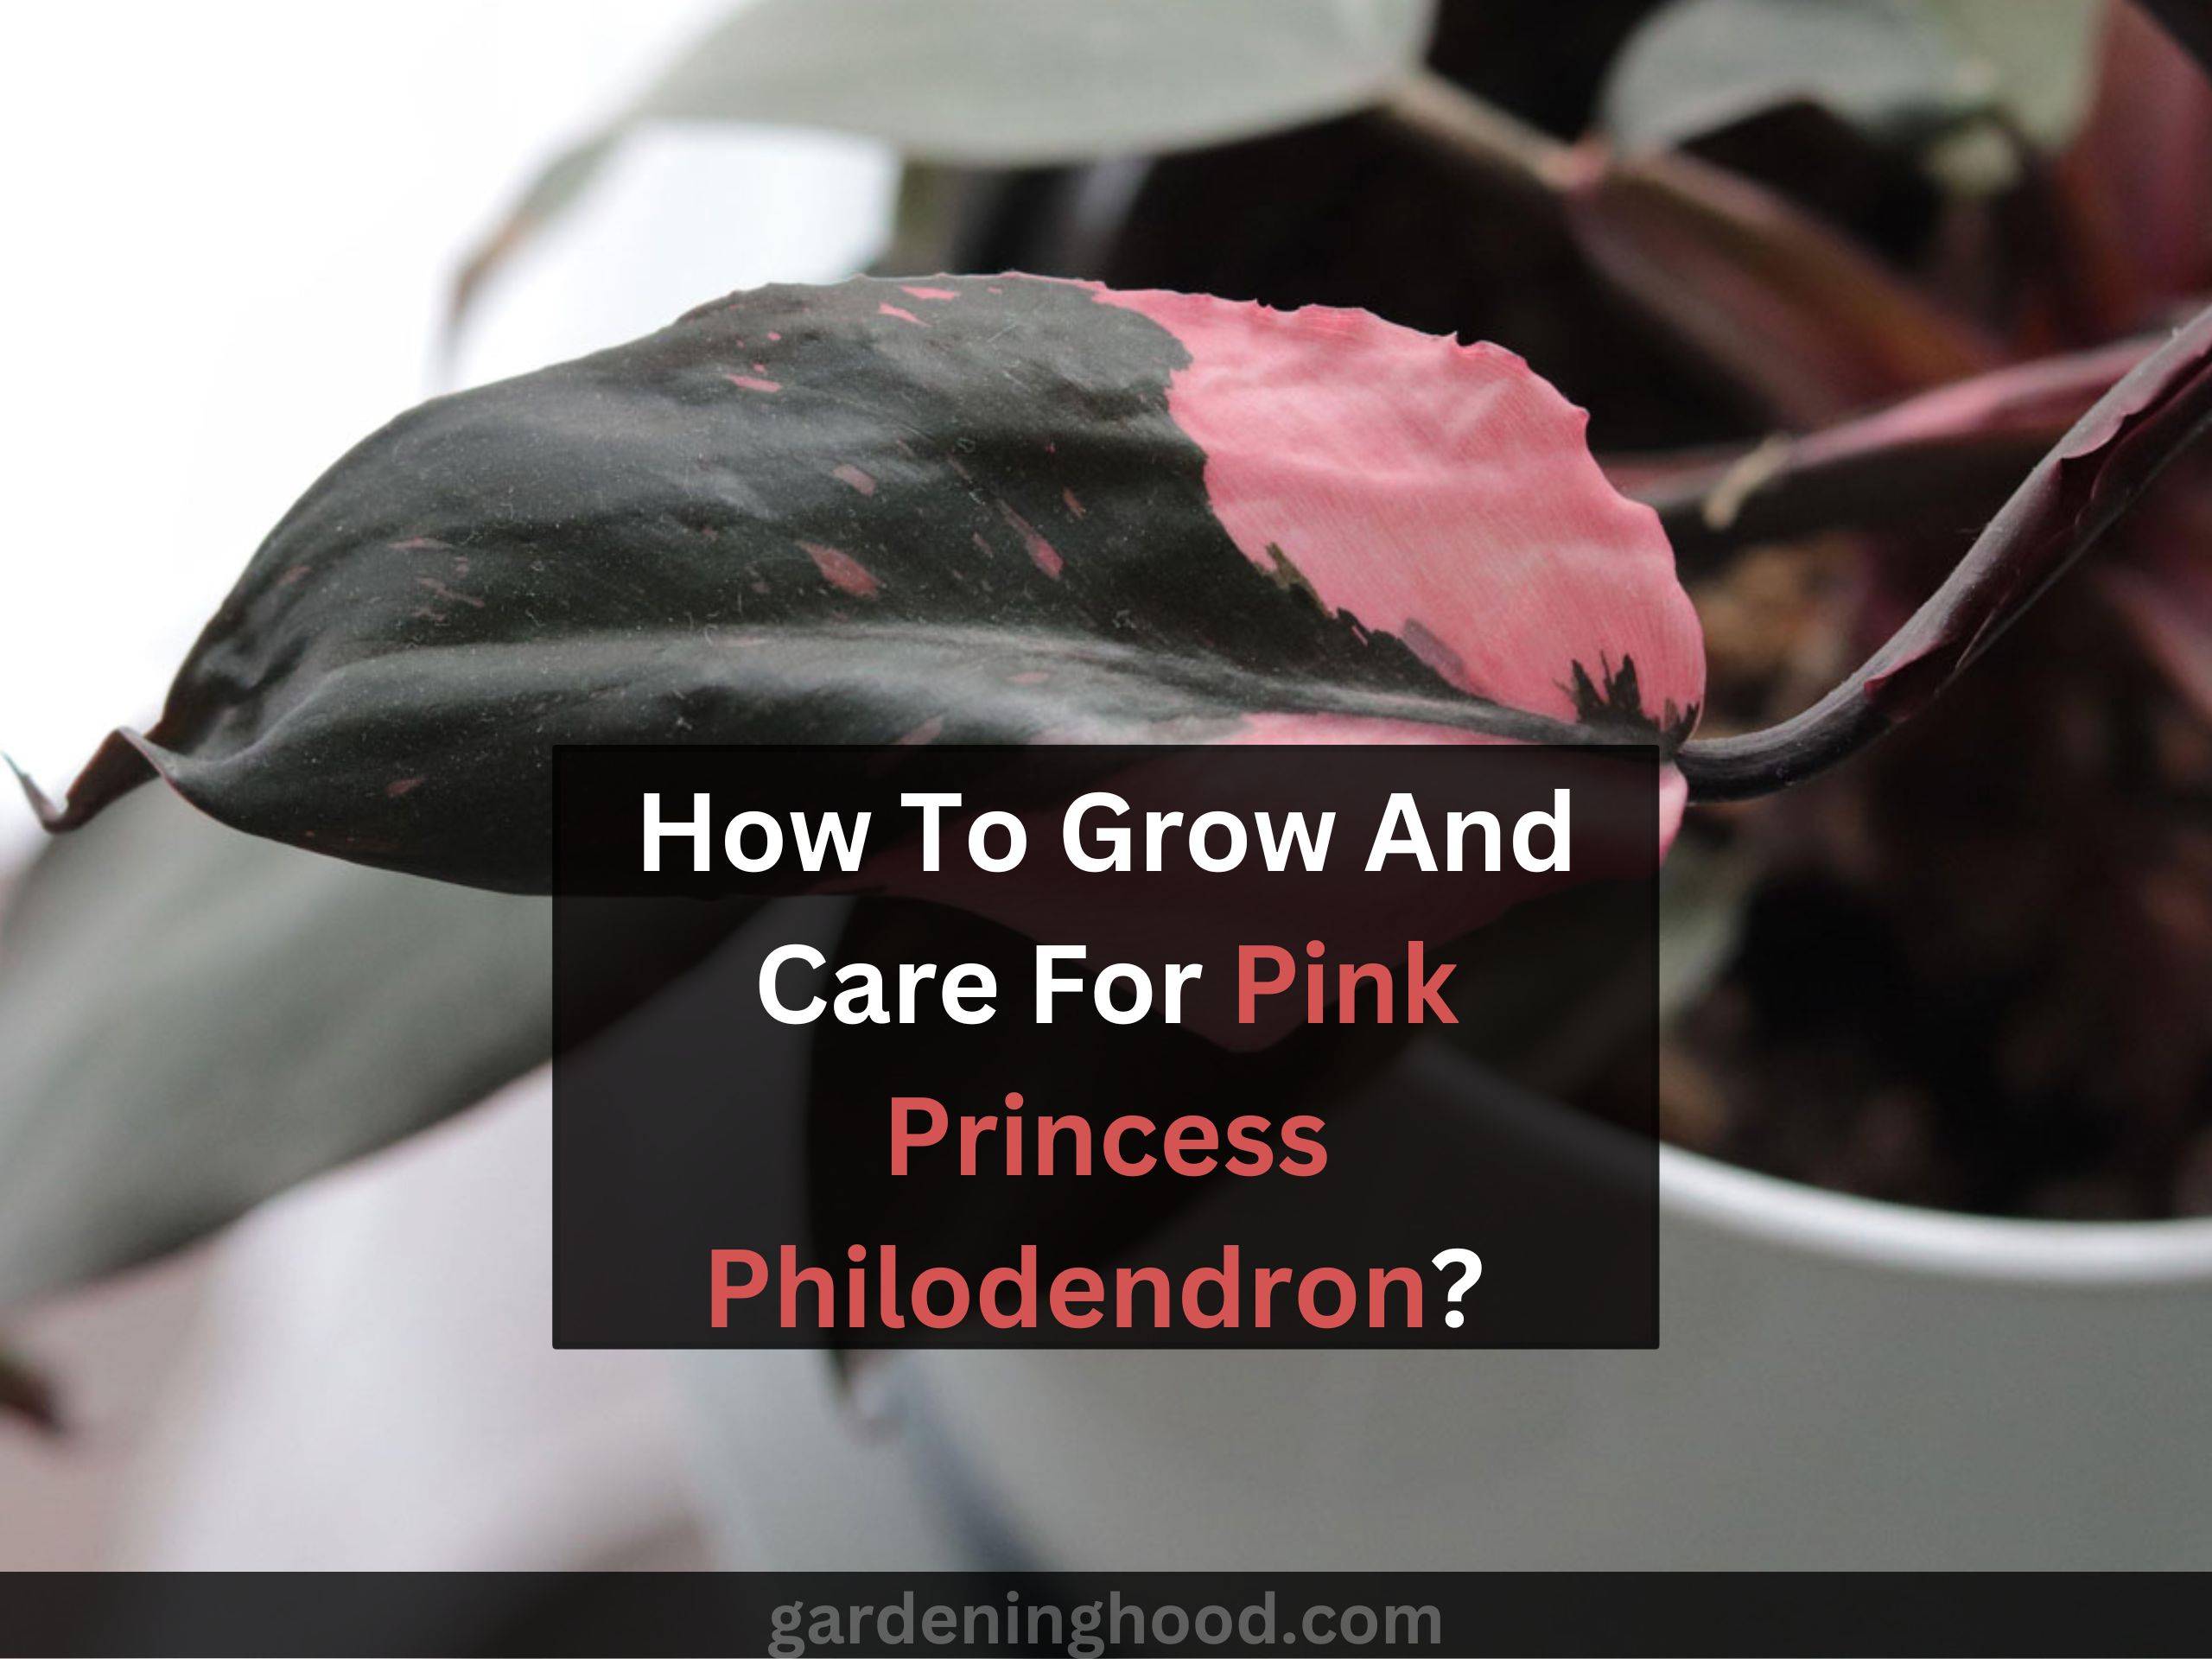 How To Grow And Care For Pink Princess Philodendron?